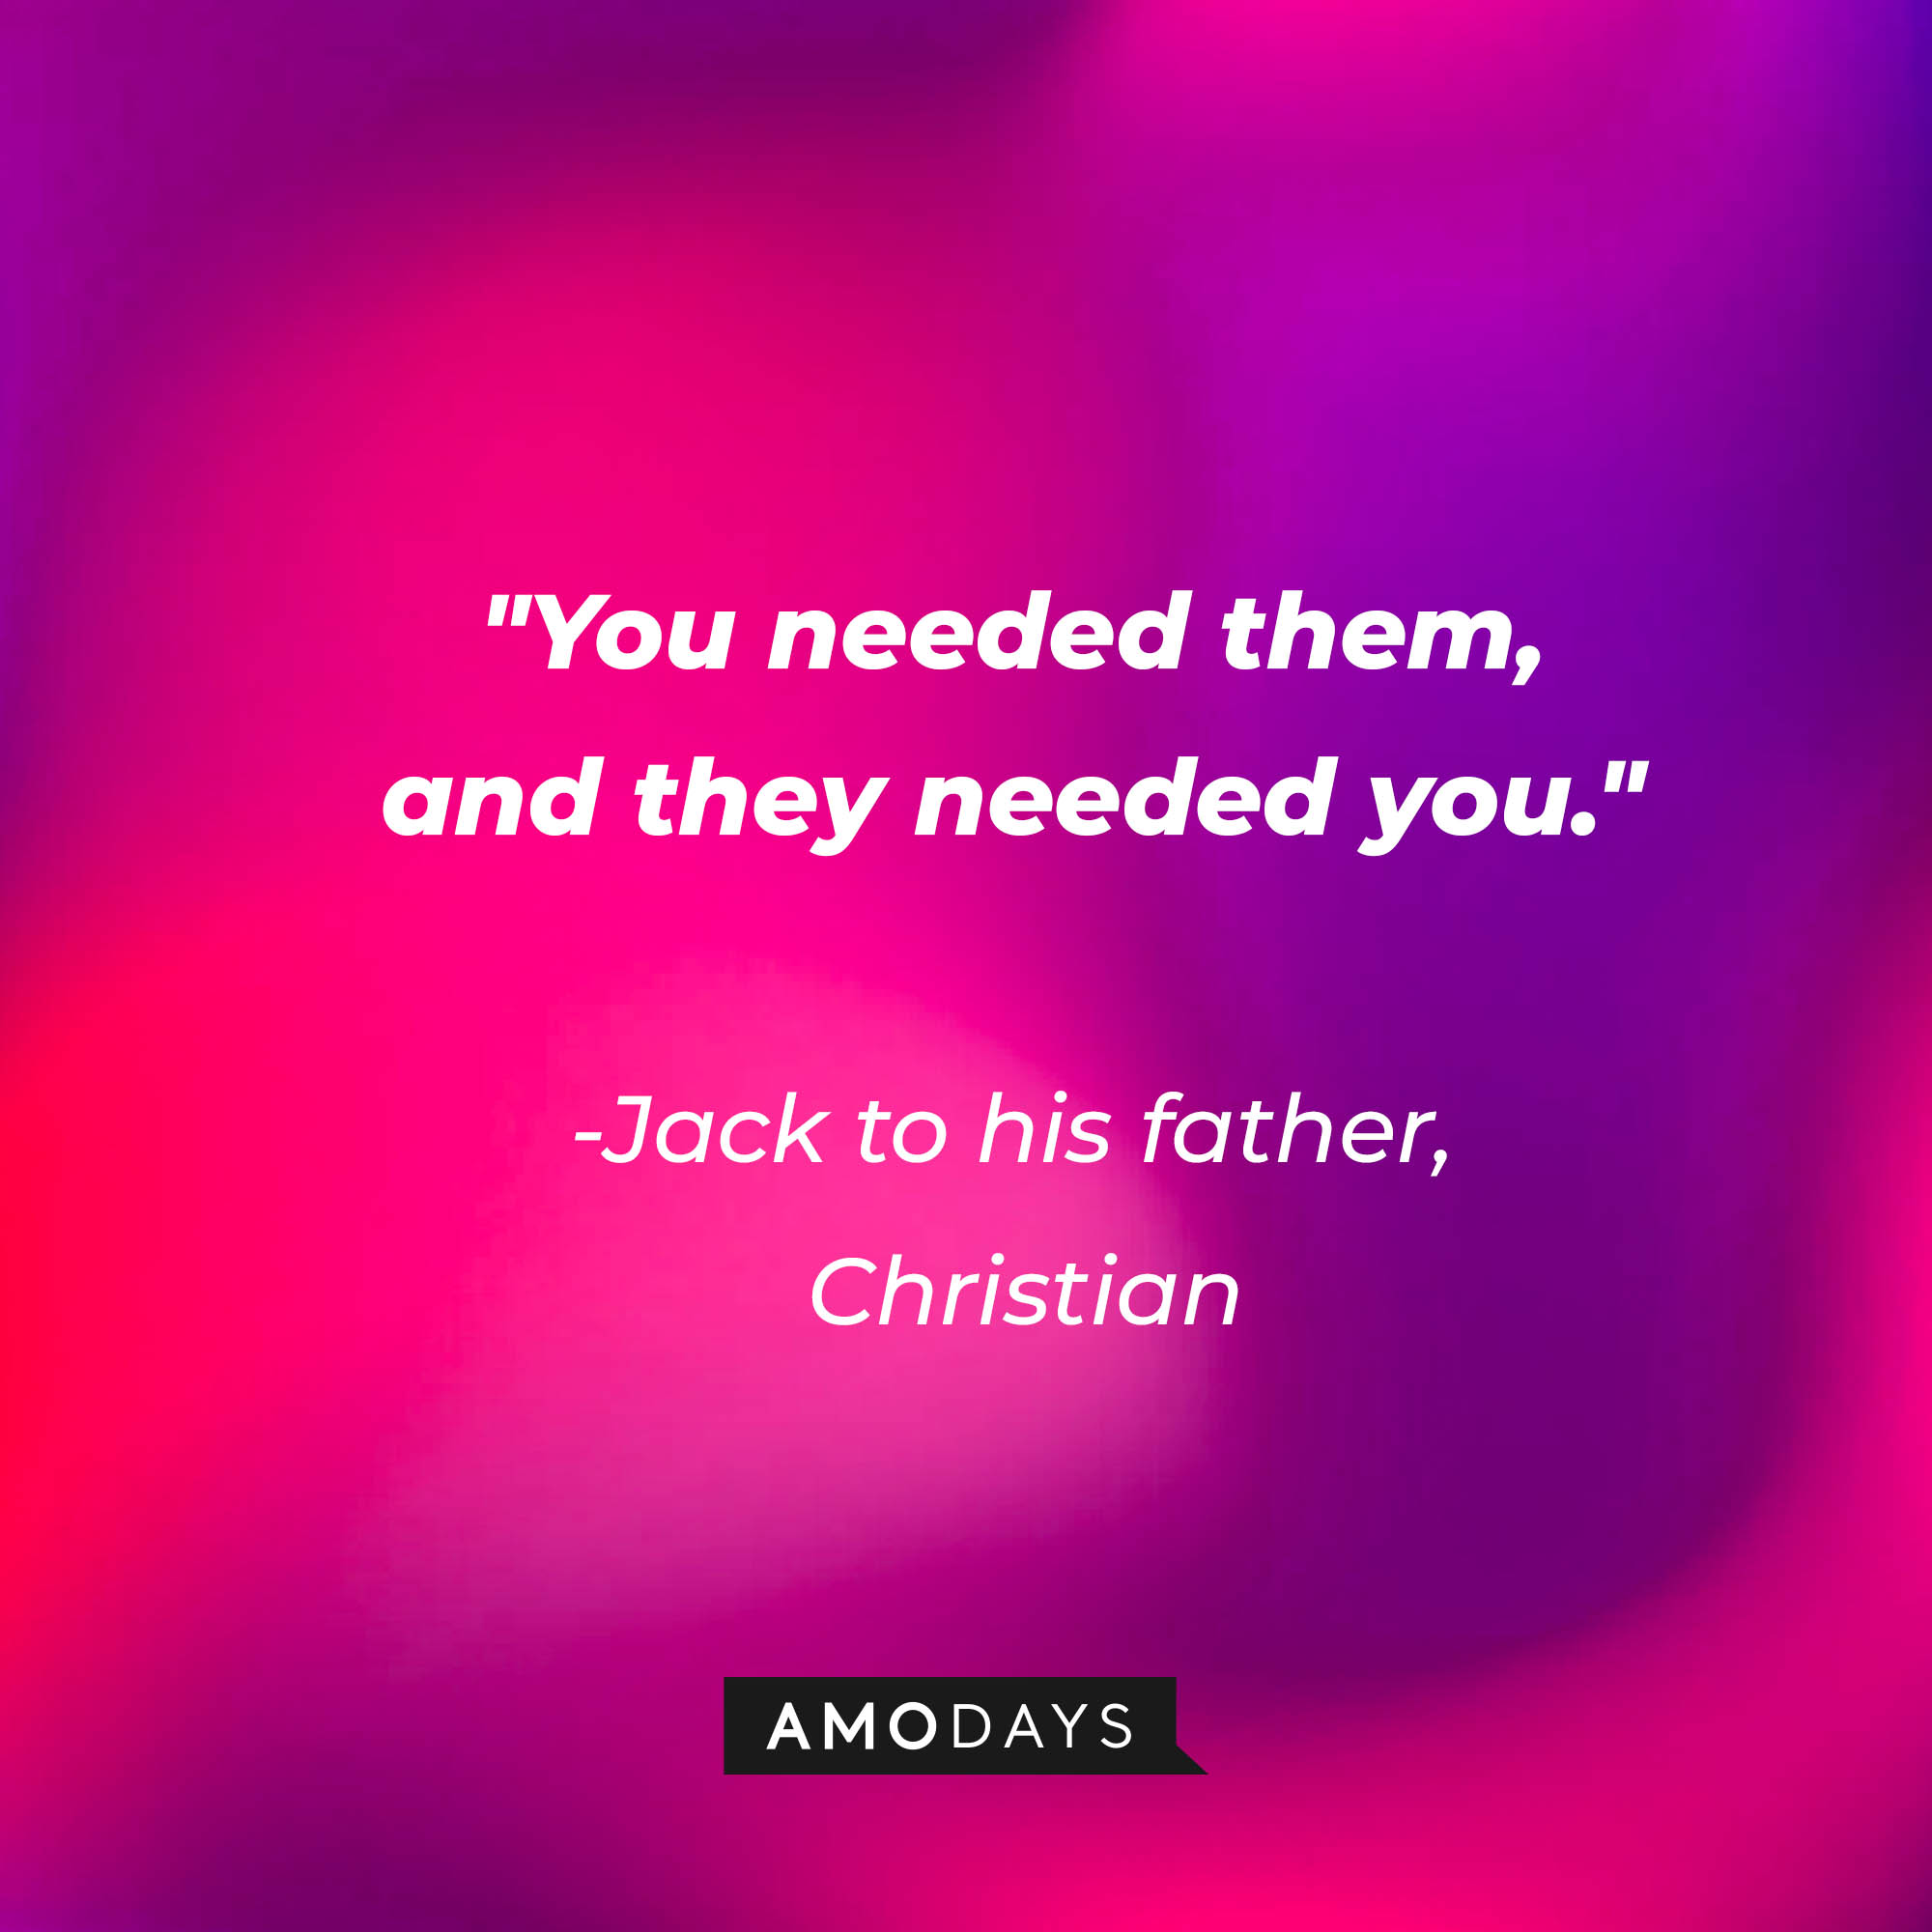 A quote from Jack to his father: "You needed them, and they needed you." | Source: AmoDays